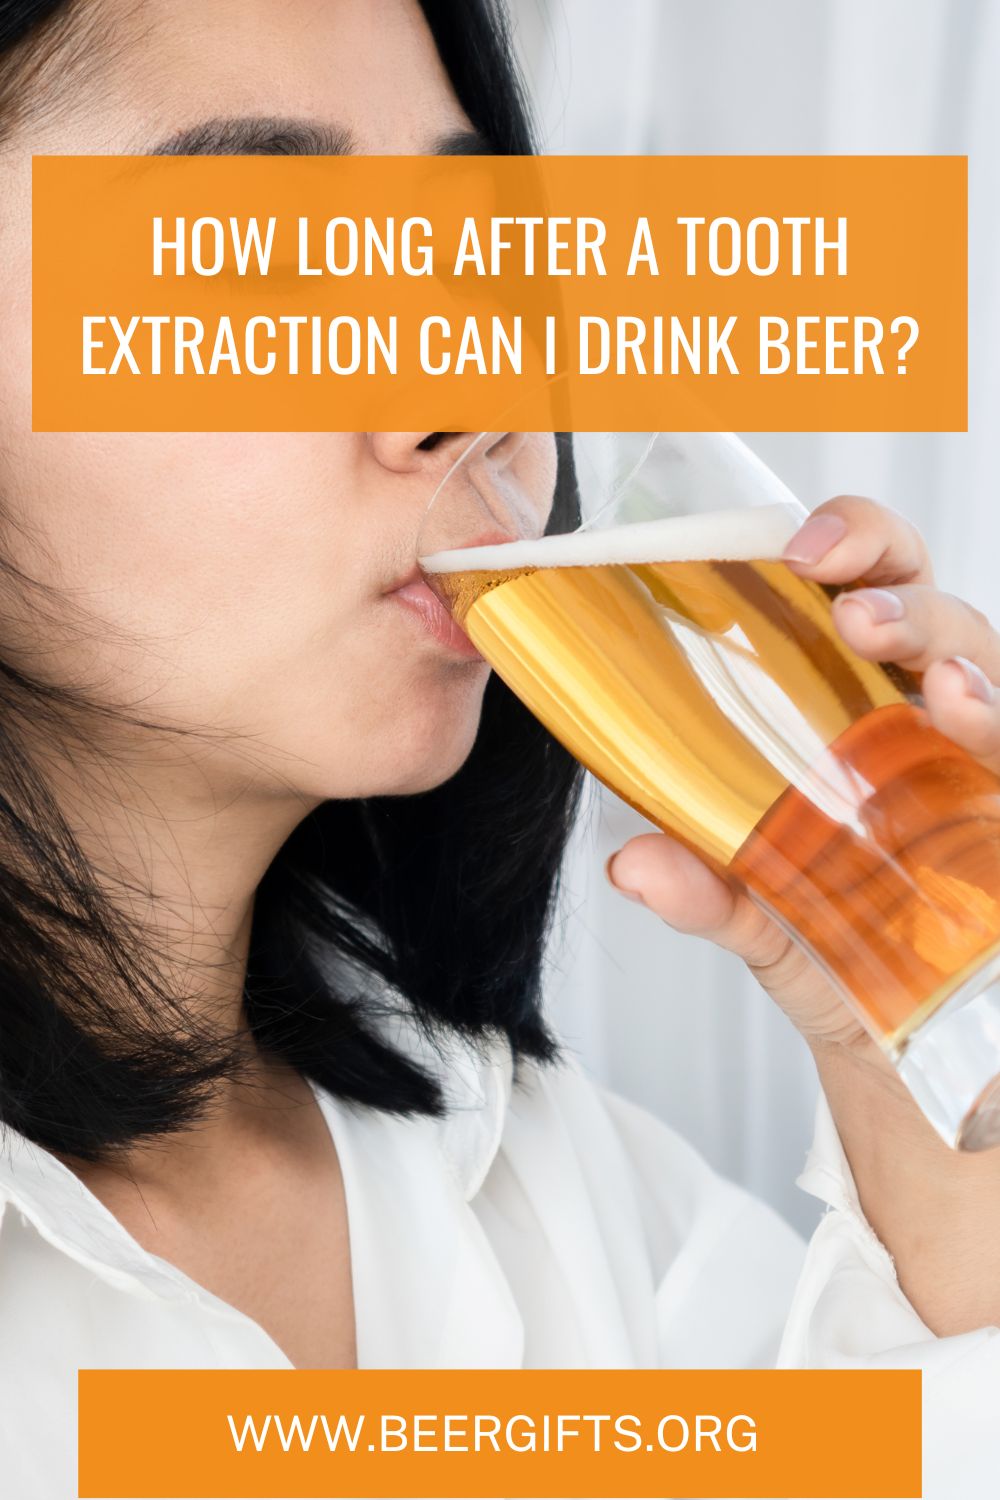 How Long After a Tooth Extraction Can I Drink Beer?8